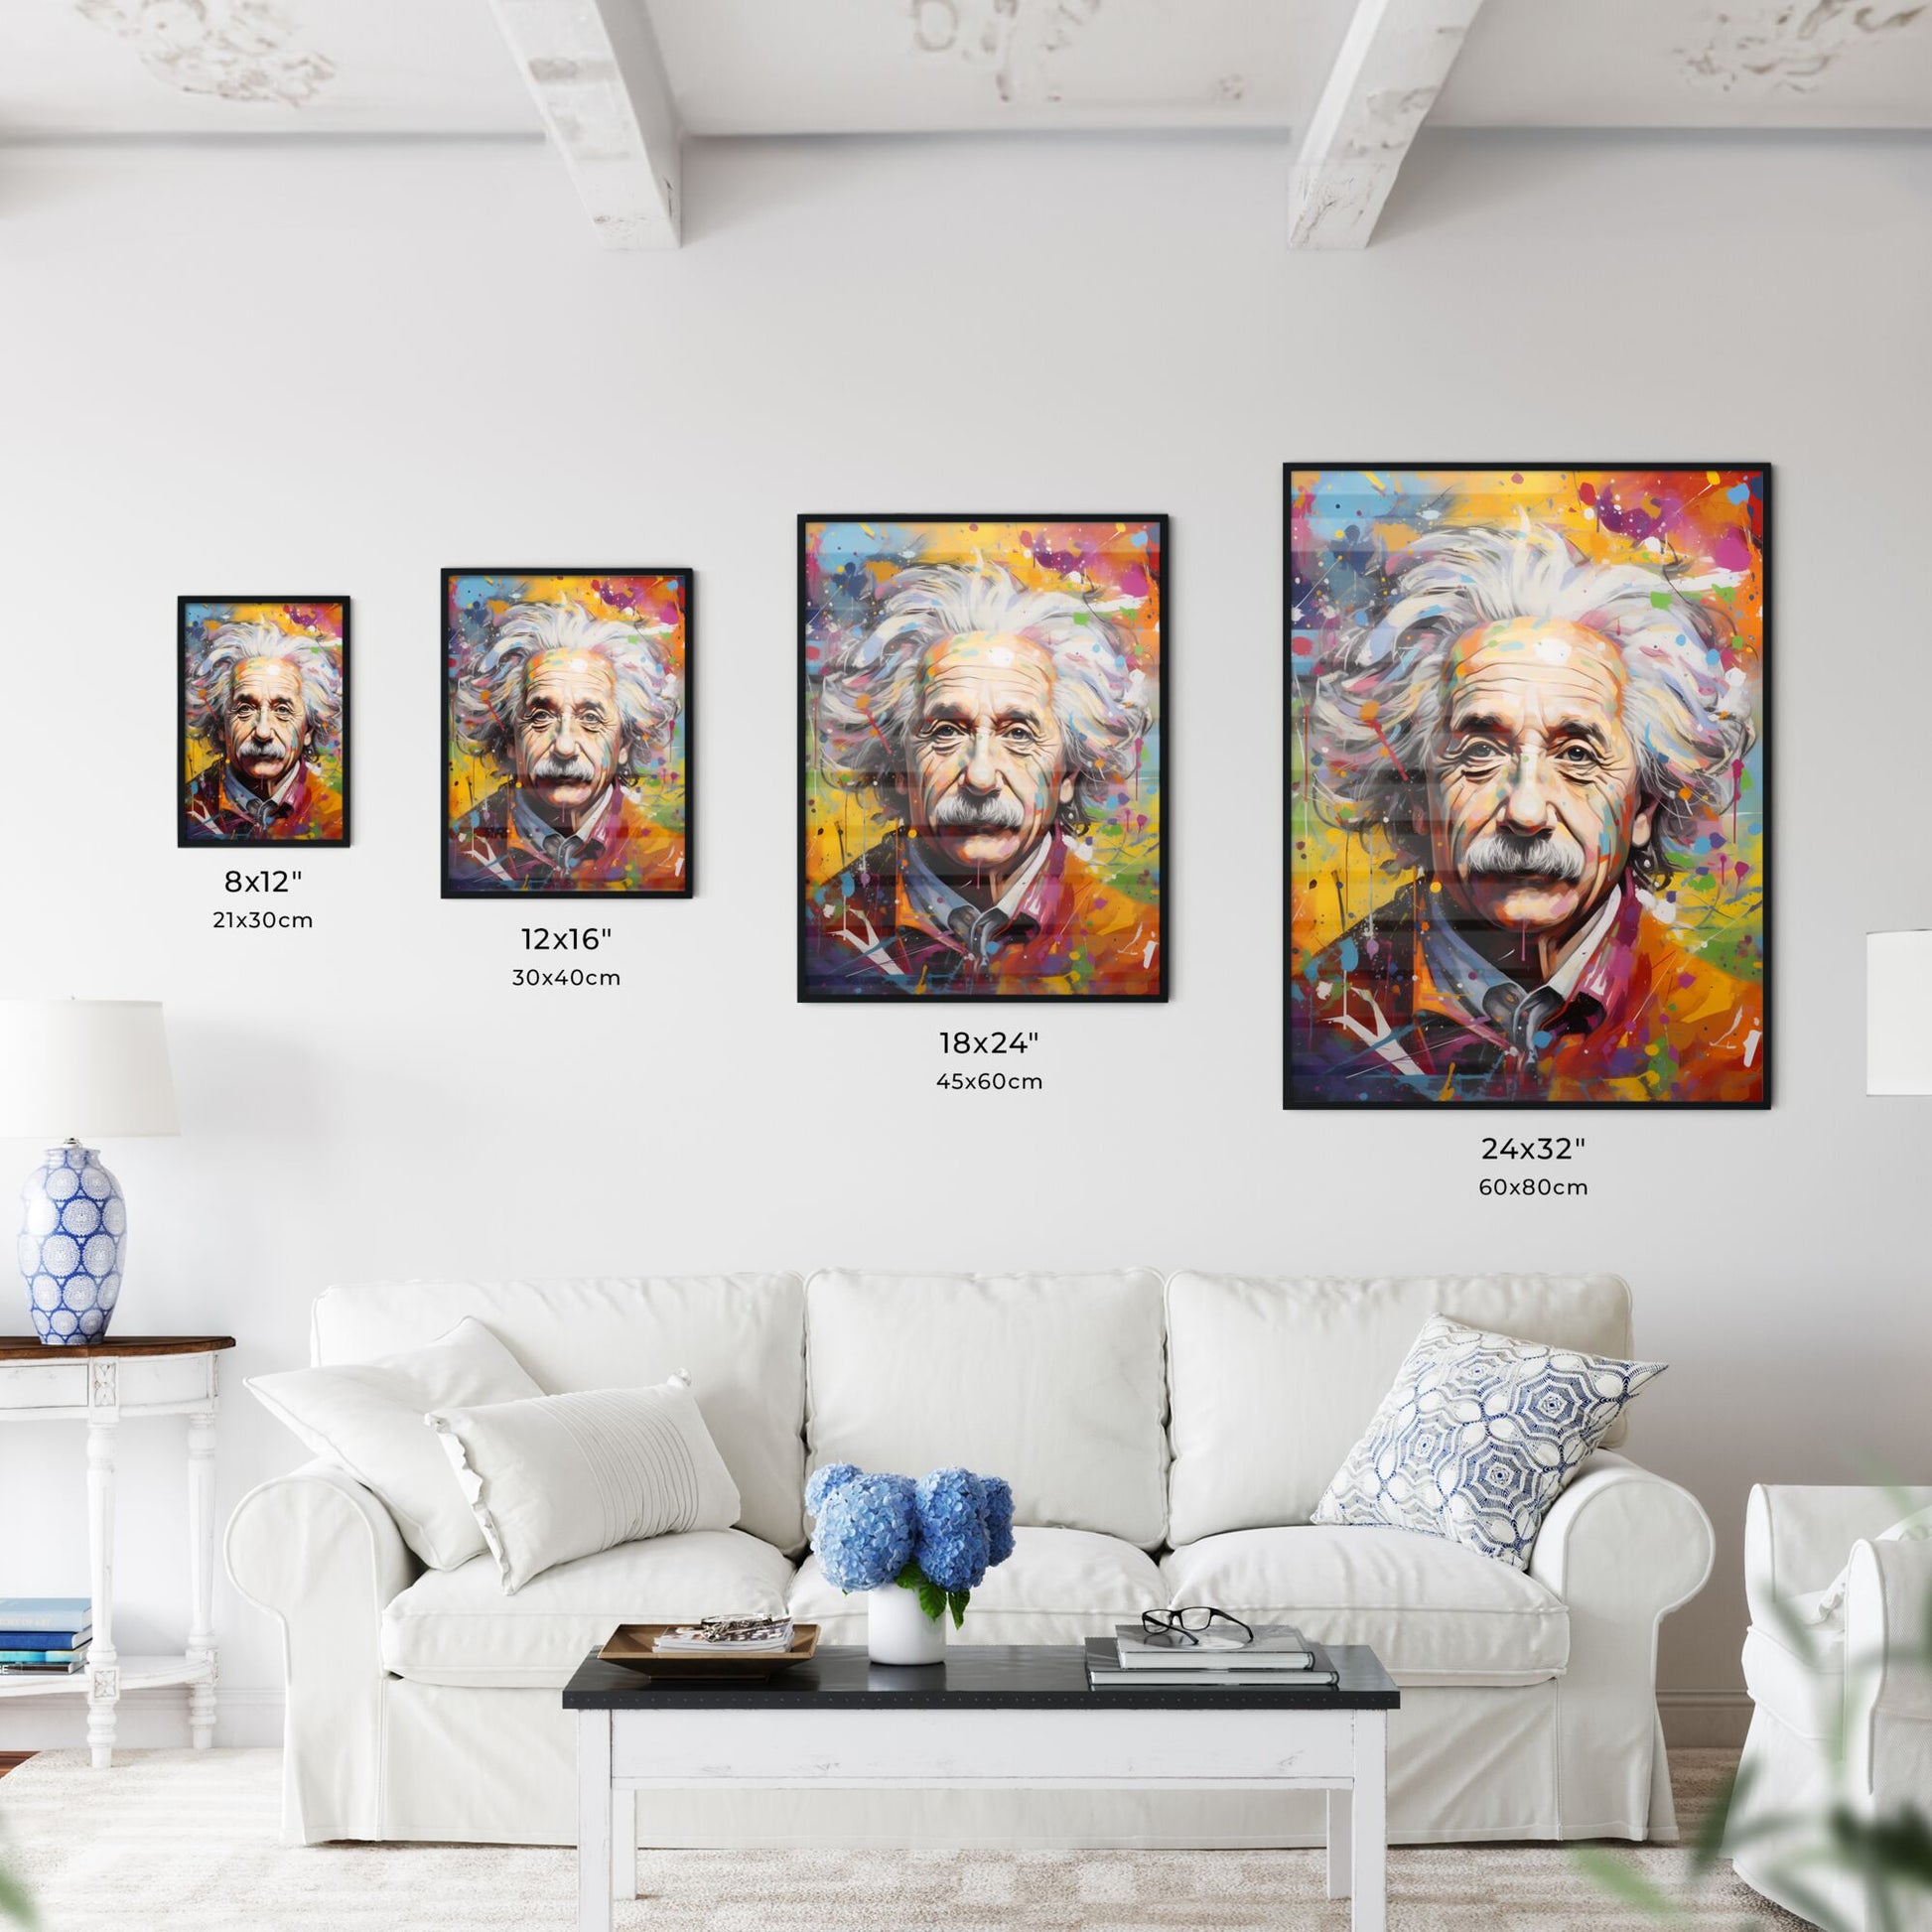 Albert Einstein - A Painting Of A Man With White Hair Default Title